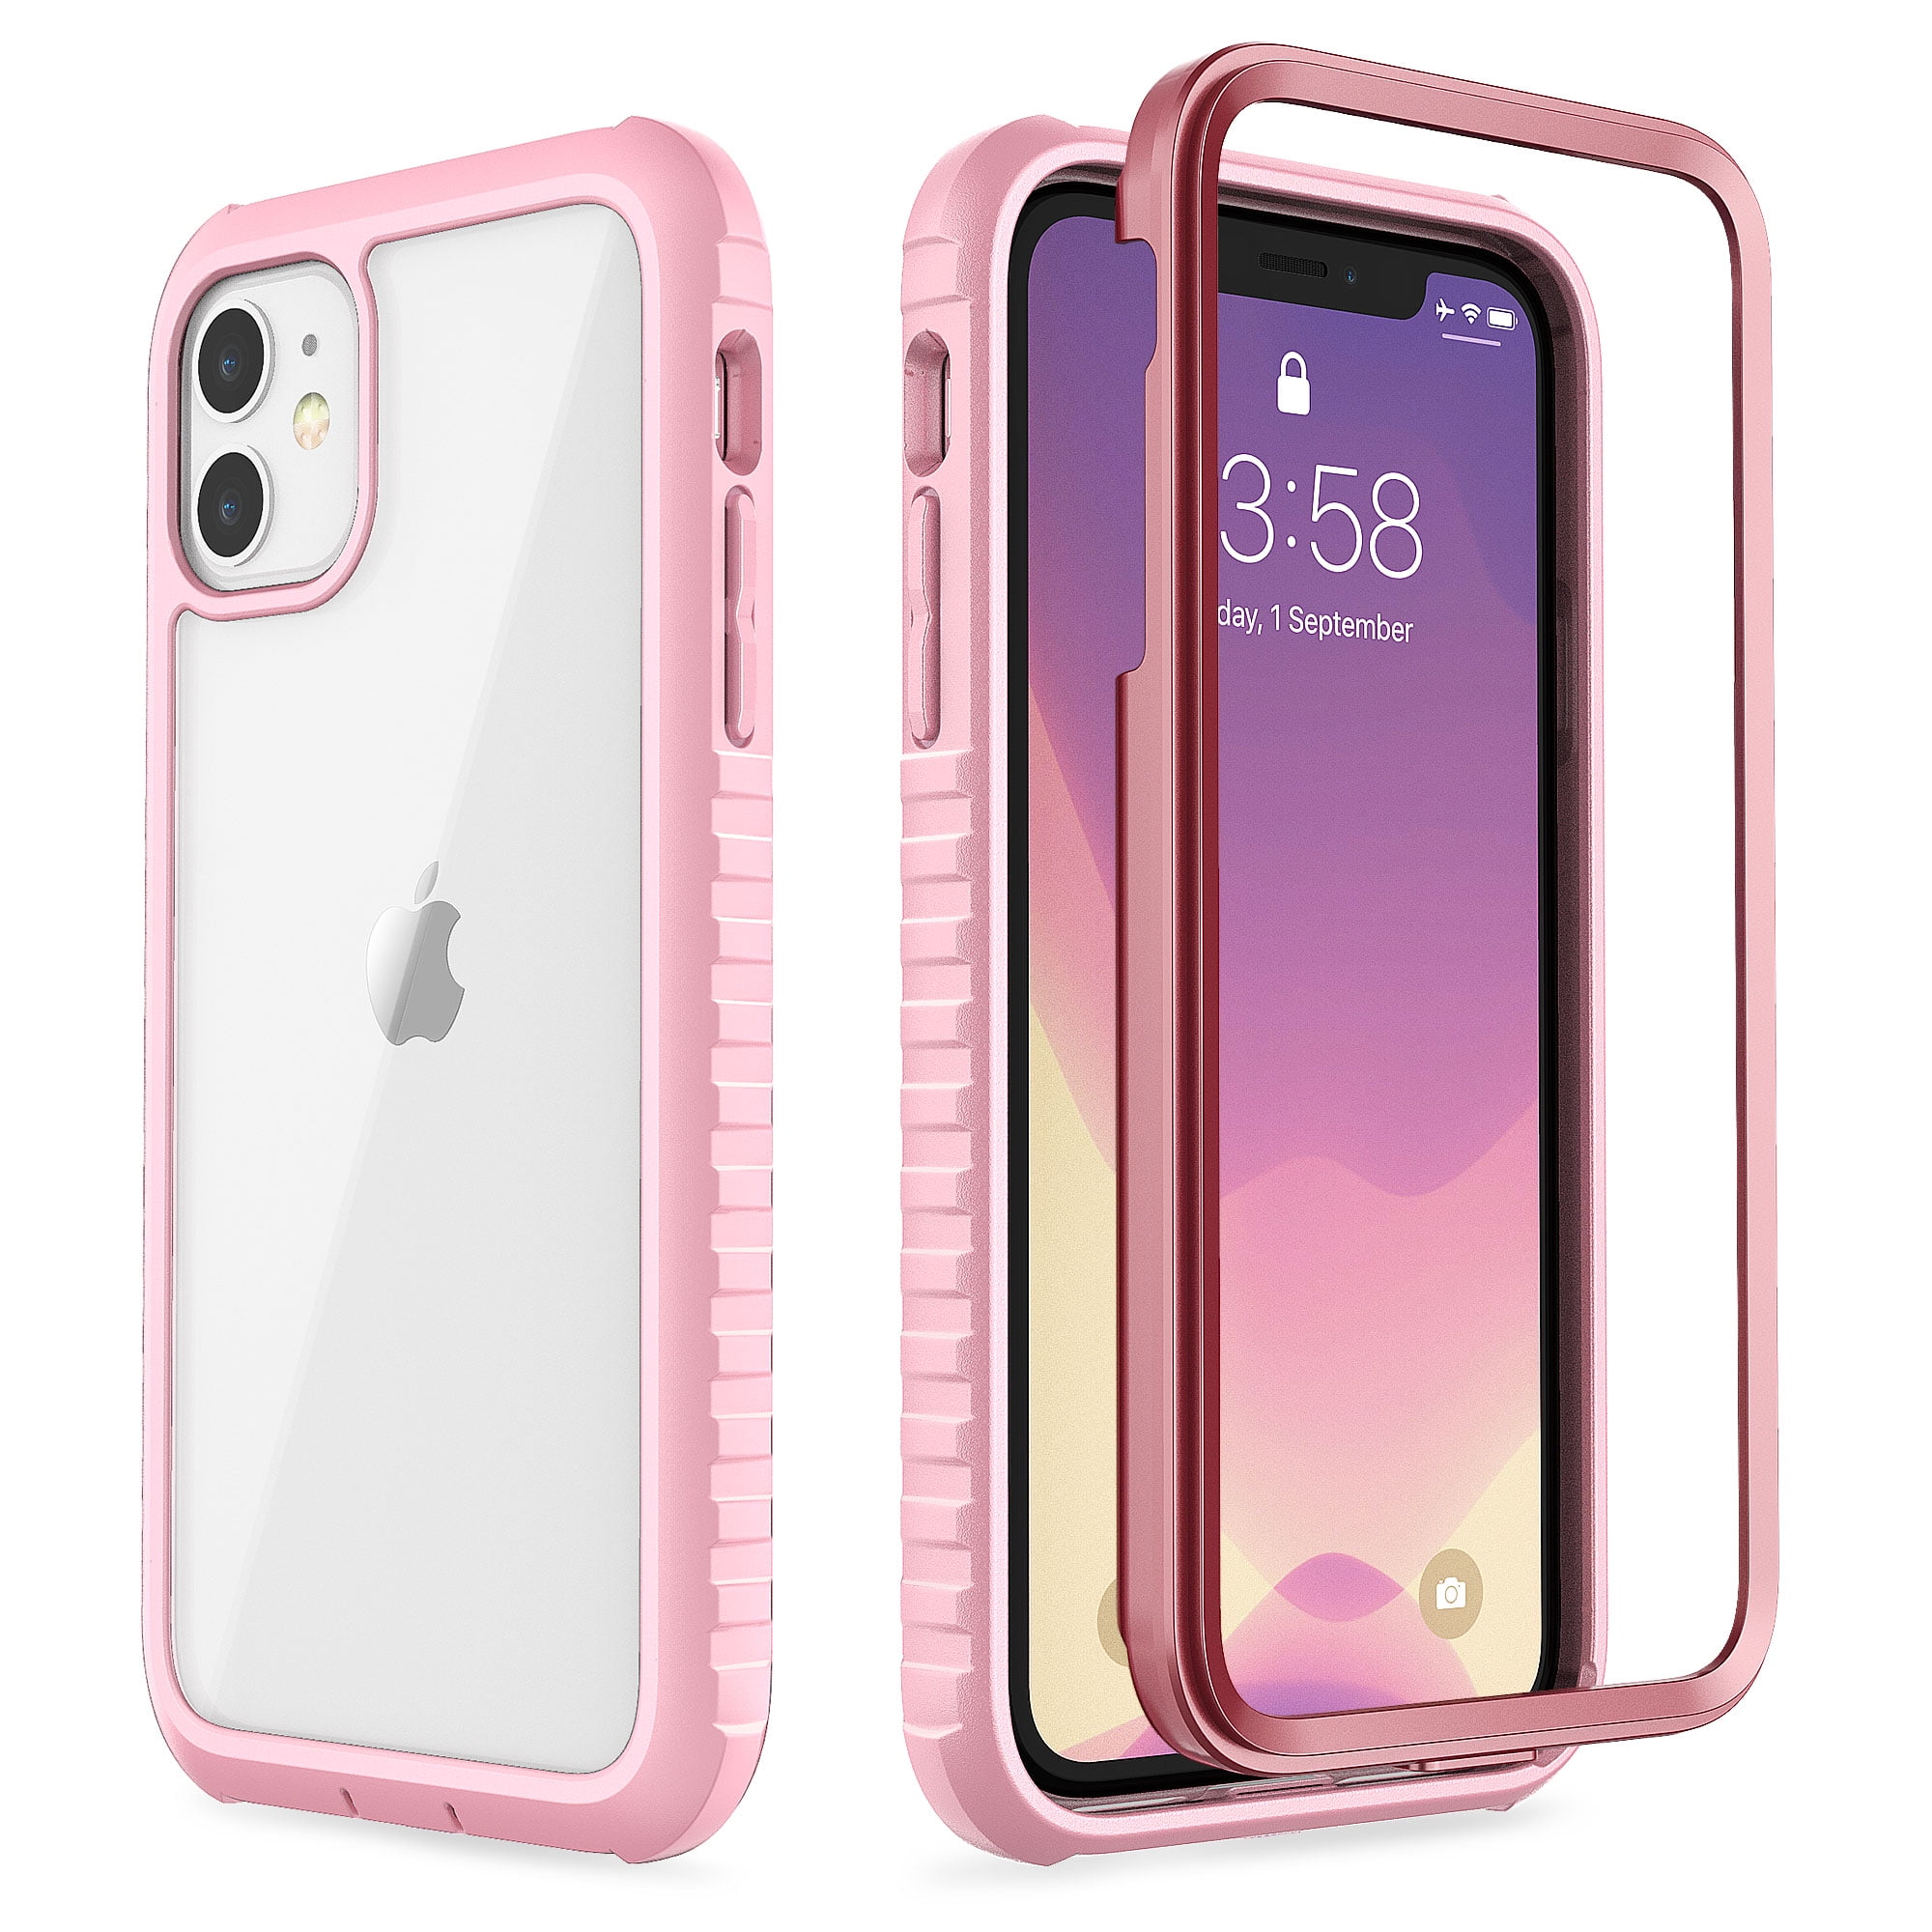 Iphone 11 Case Ulak Clear Heavy Duty Protection Shockproof Rugged